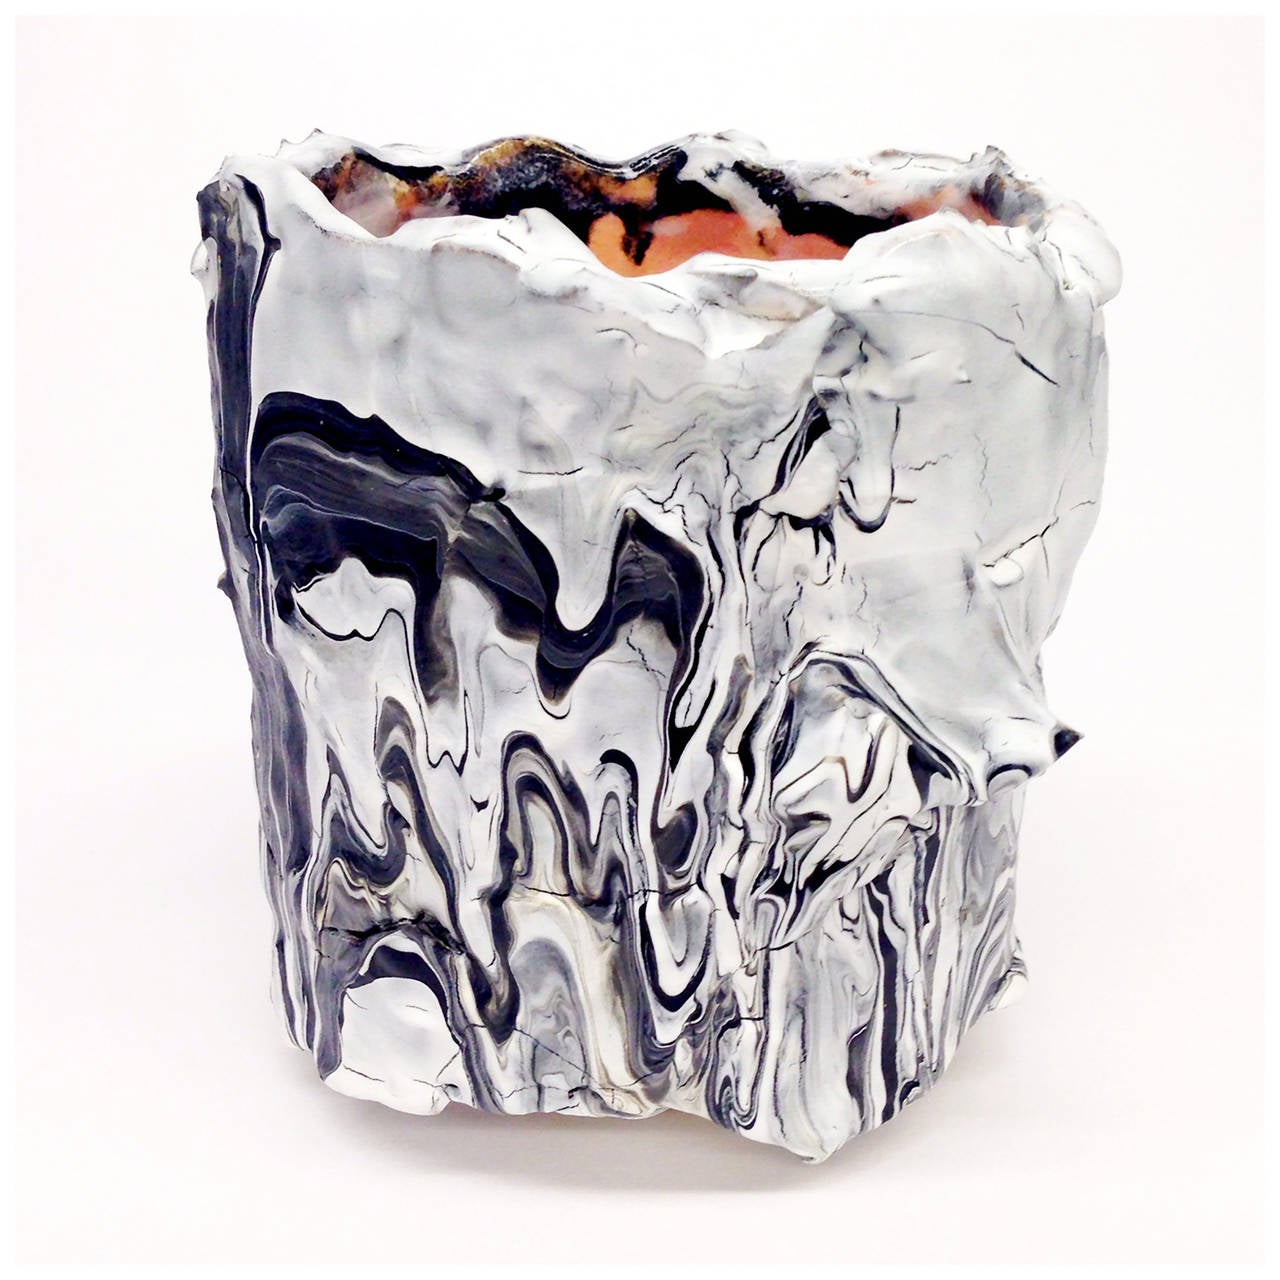 Contemporary ceramic vessel by LA based mixed-media sculptor Brian Rochefort for Kelly Behun Studio. Highly textured and worked surface resulting from multiple firings. Black and white glaze on exterior, salmon color glaze interior. Watertight, may